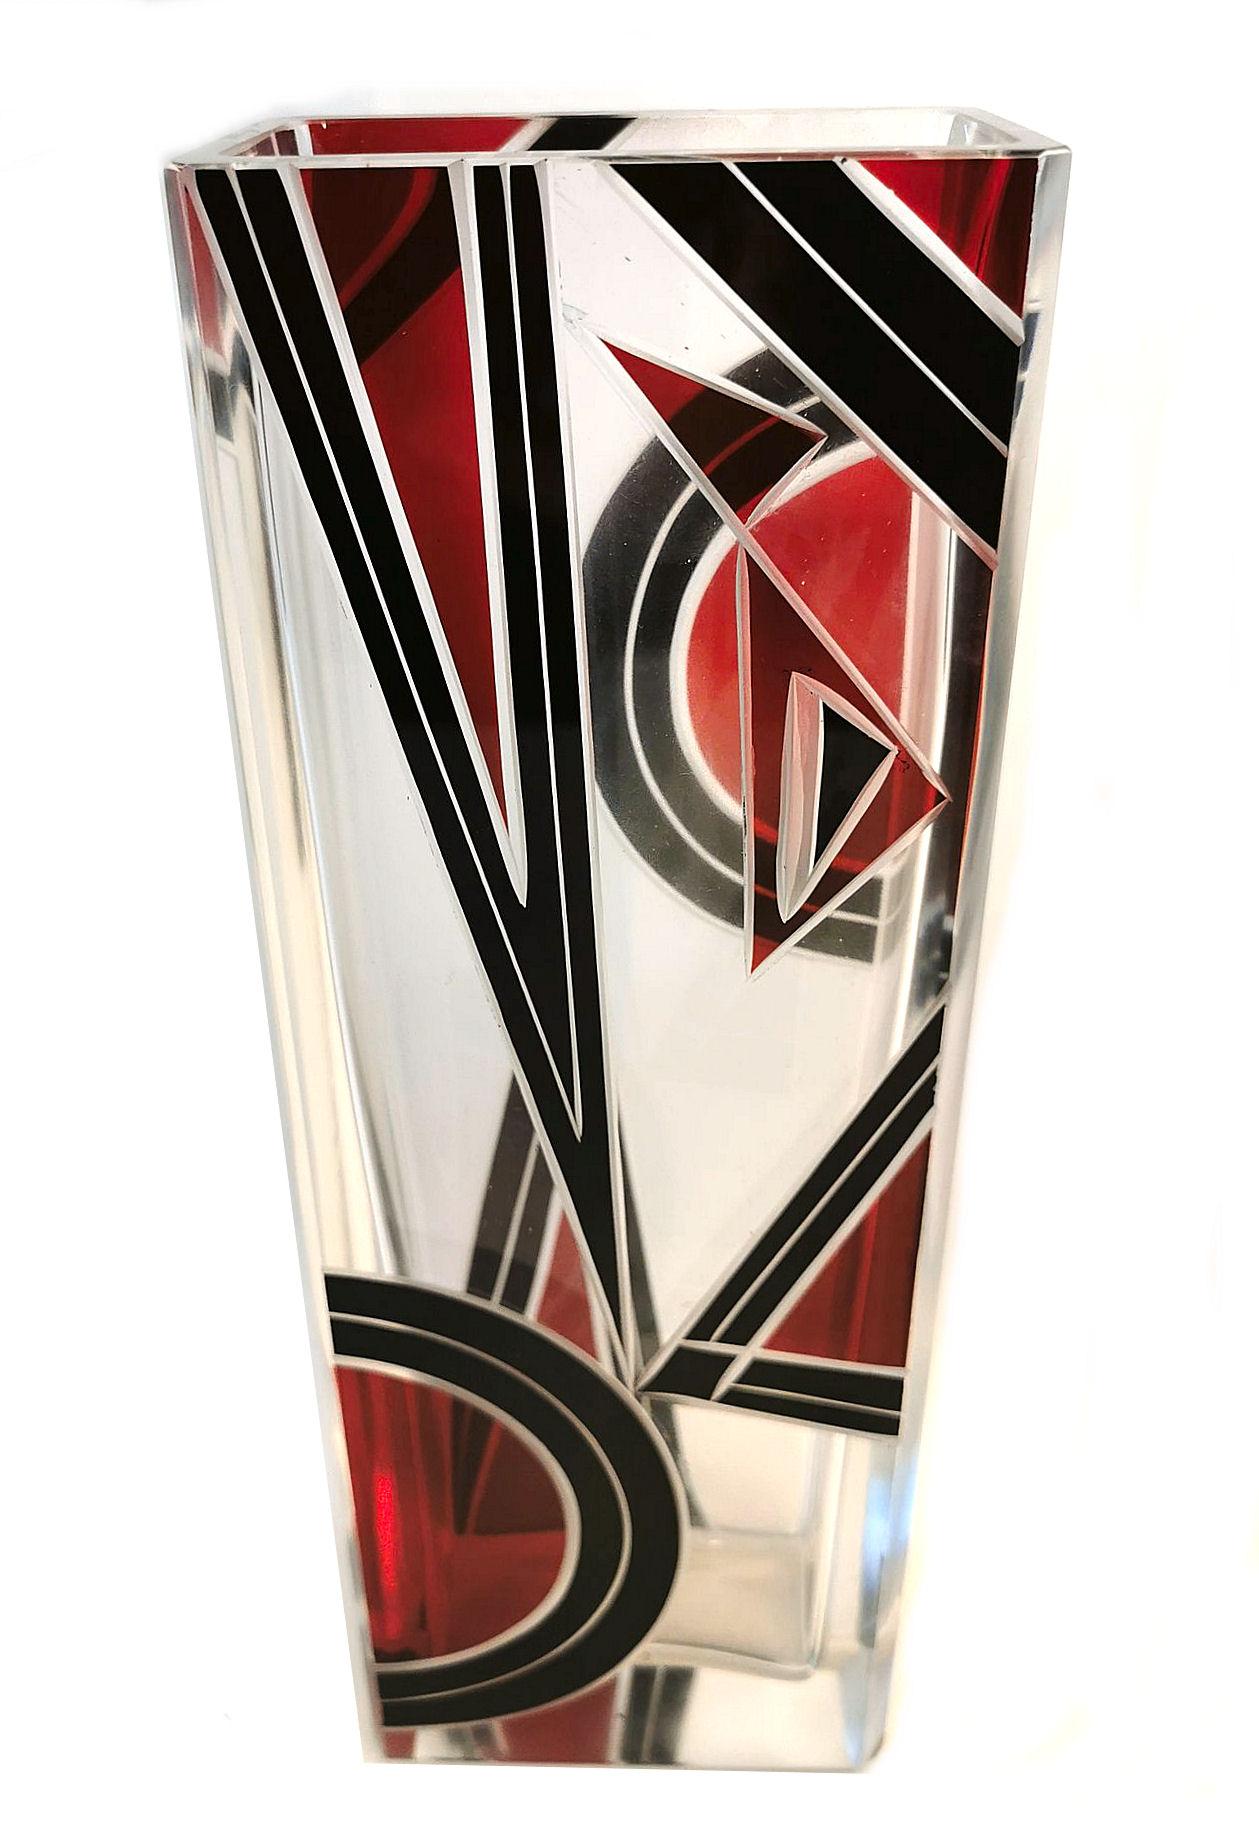 20th Century Art Deco Glass and Enamel Etched Geometric Vase